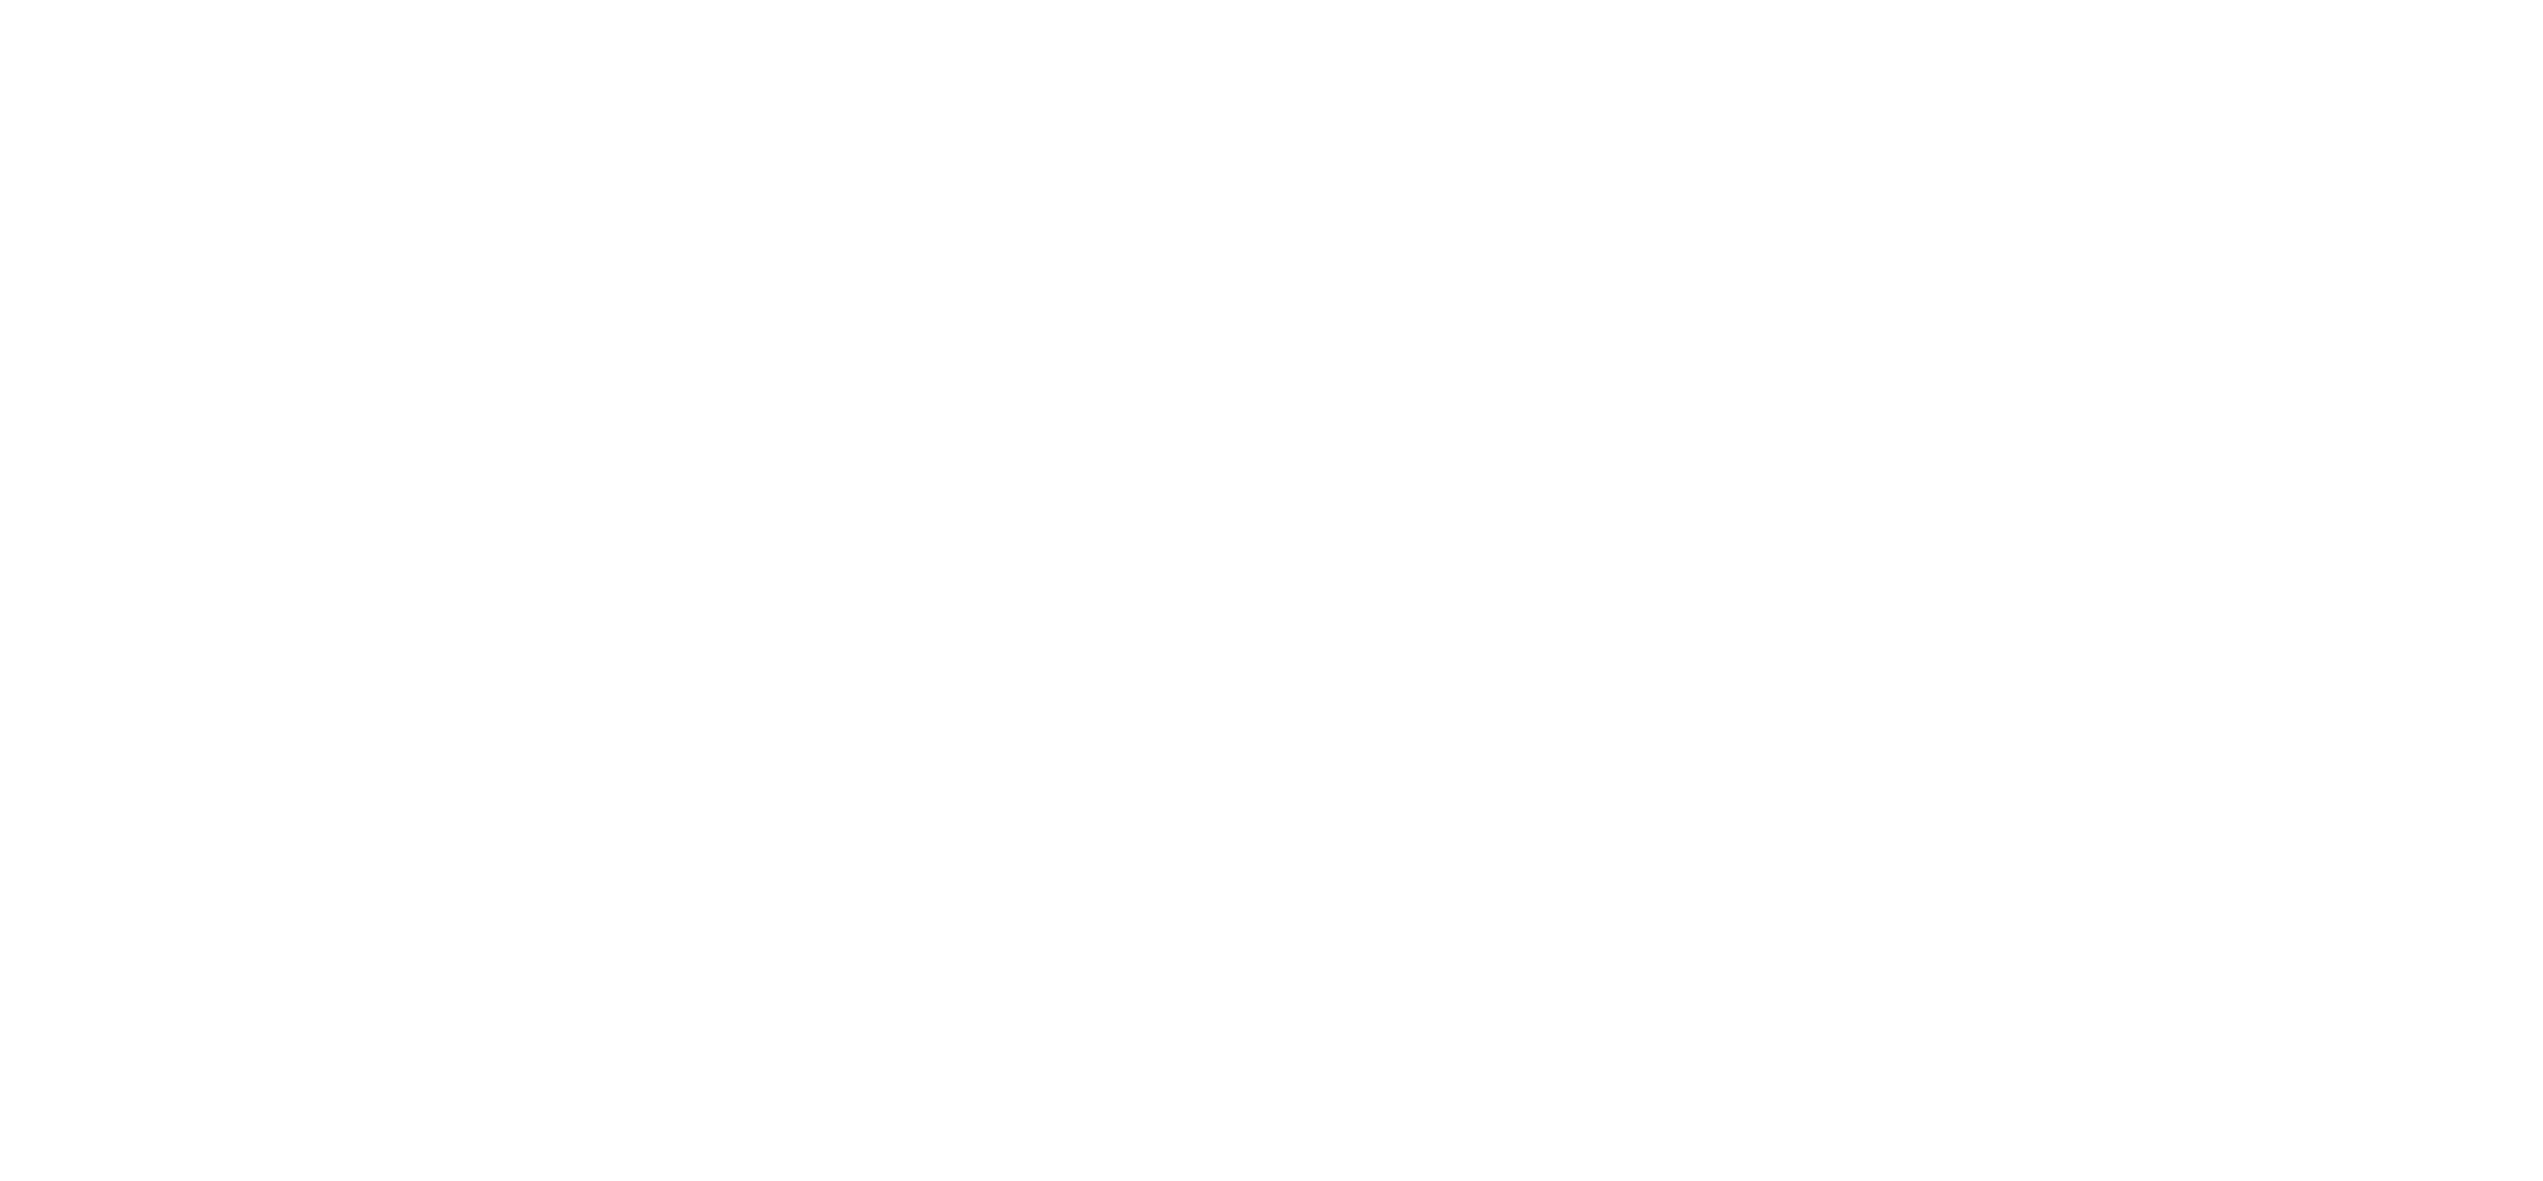 BSI ISO/IEC 27001 Information Security Management